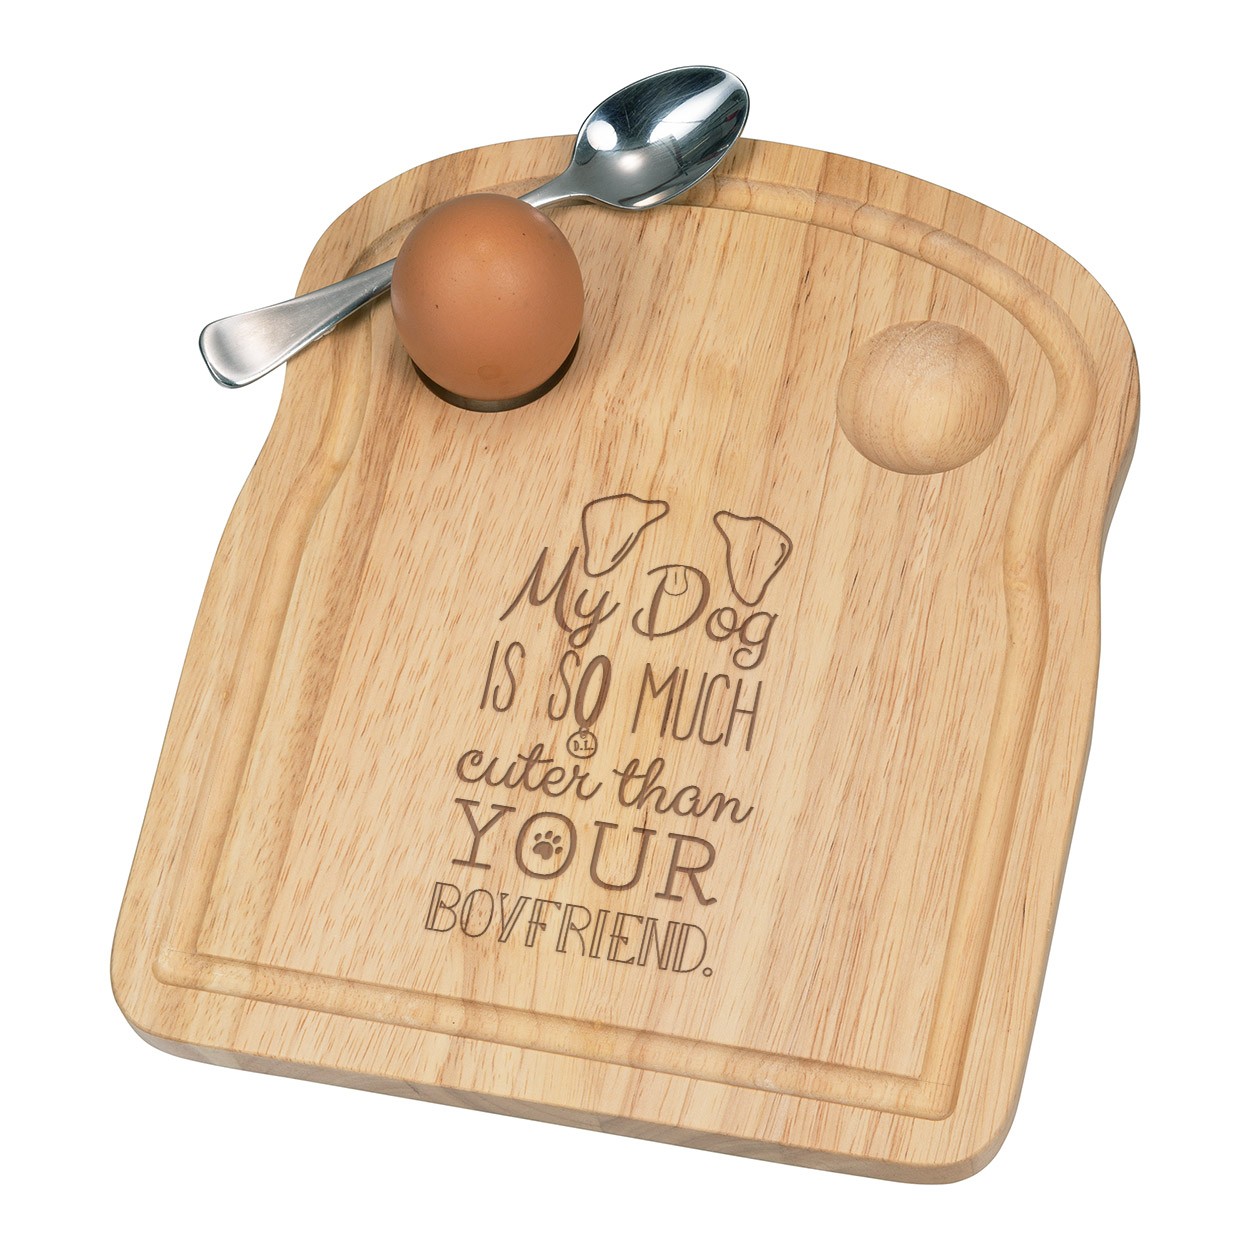 My Dog Is Cuter Than Your Boyfriend Brown Ears Breakfast Dippy Egg Cup Board Wooden